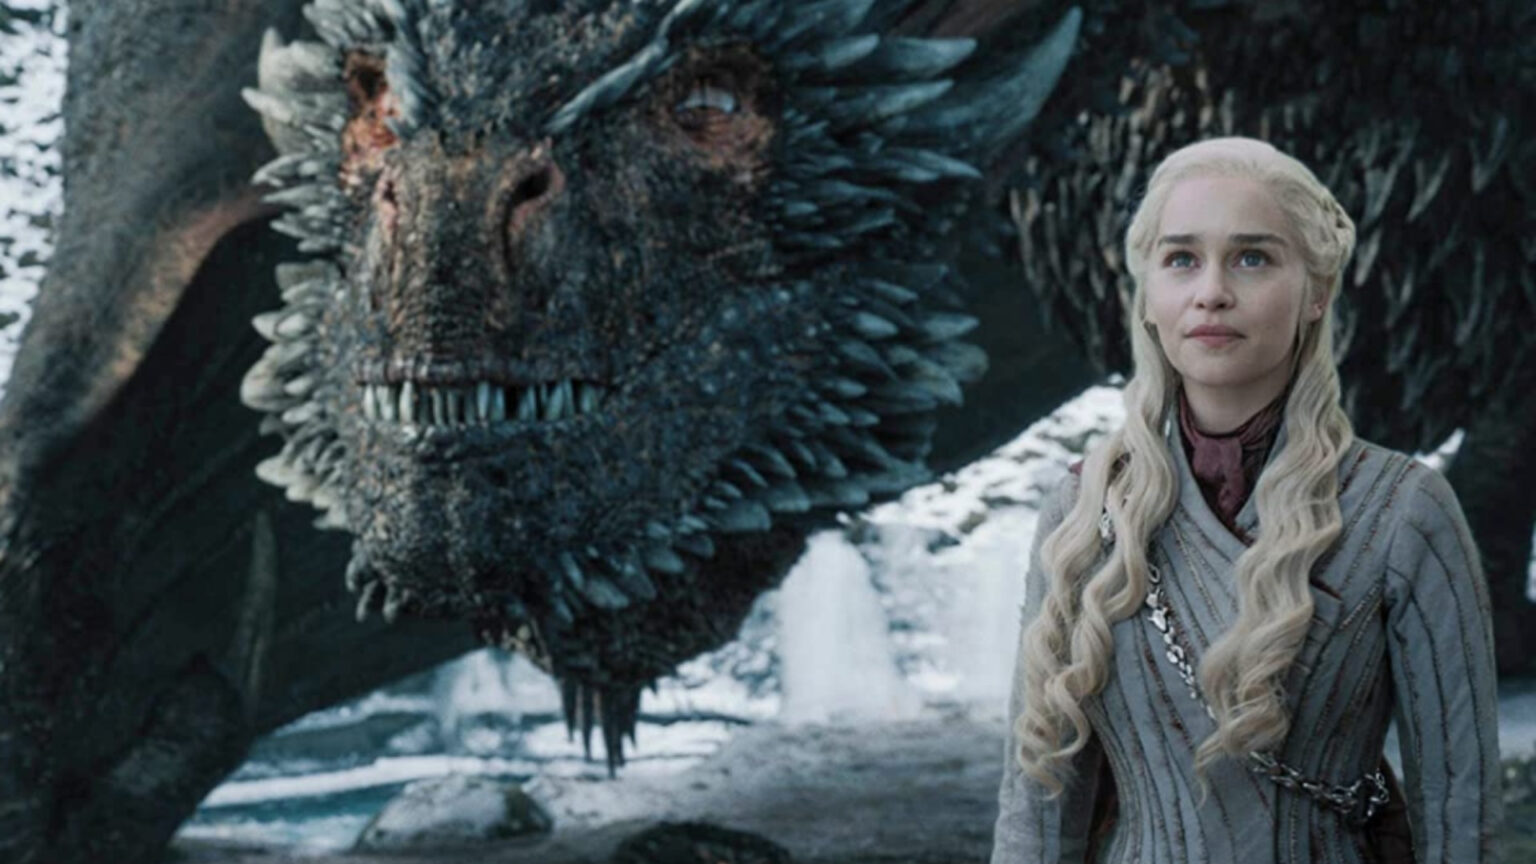 What is HBO releasing the 'GOT' prequel "House of the Dragon'? Discover whether dragons will soar on our screen again here.